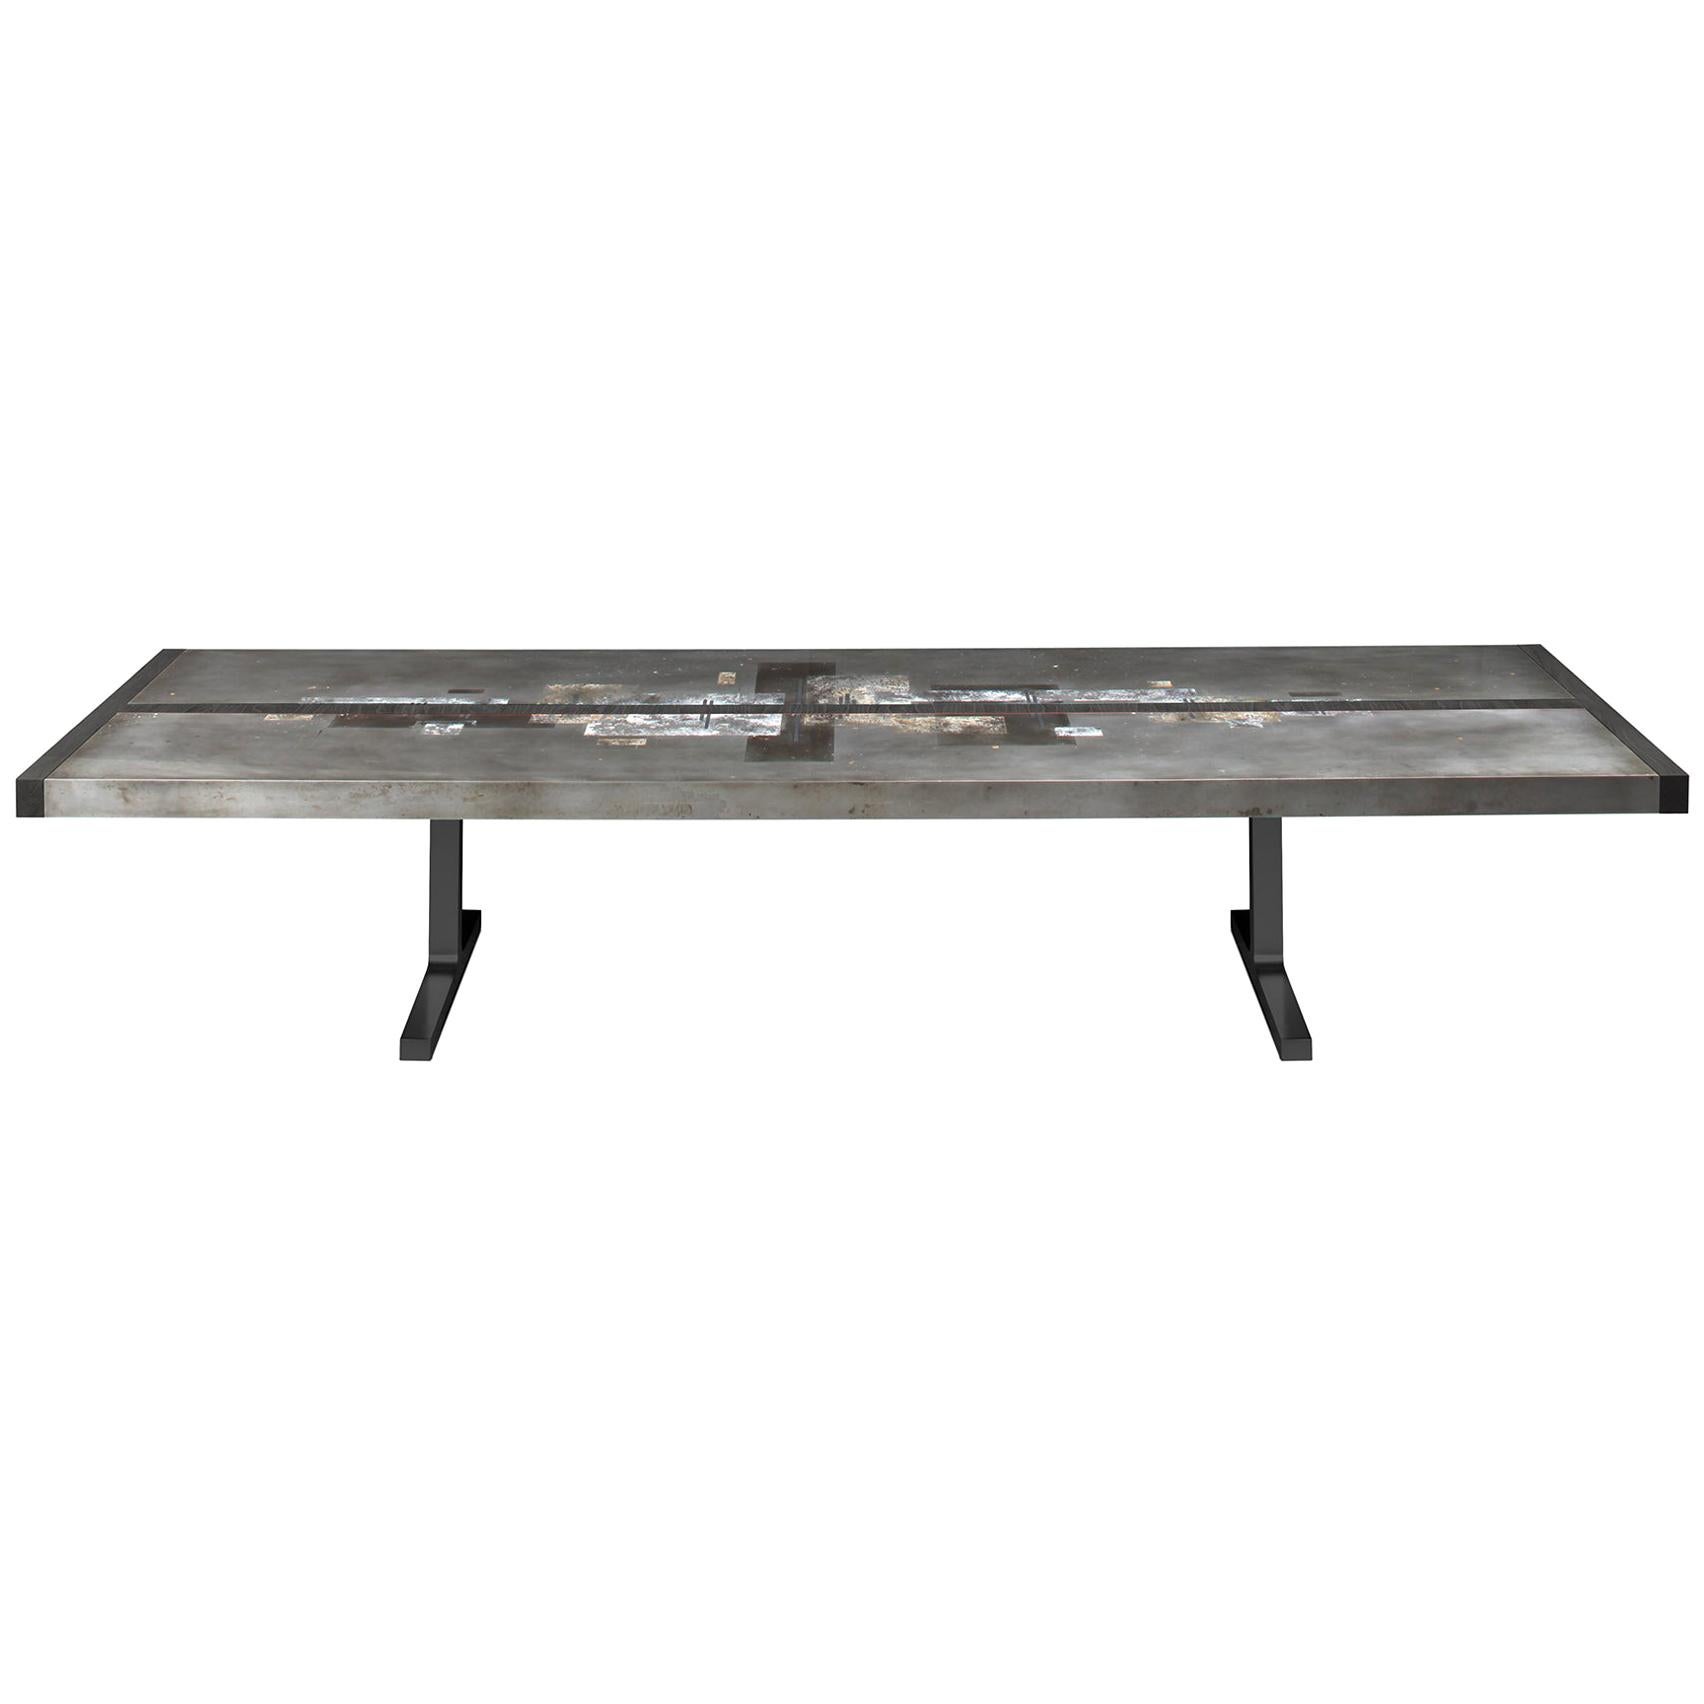 "Divided Lands" Etched Zinc Dining Table with Soho Legs by Florian Roeper